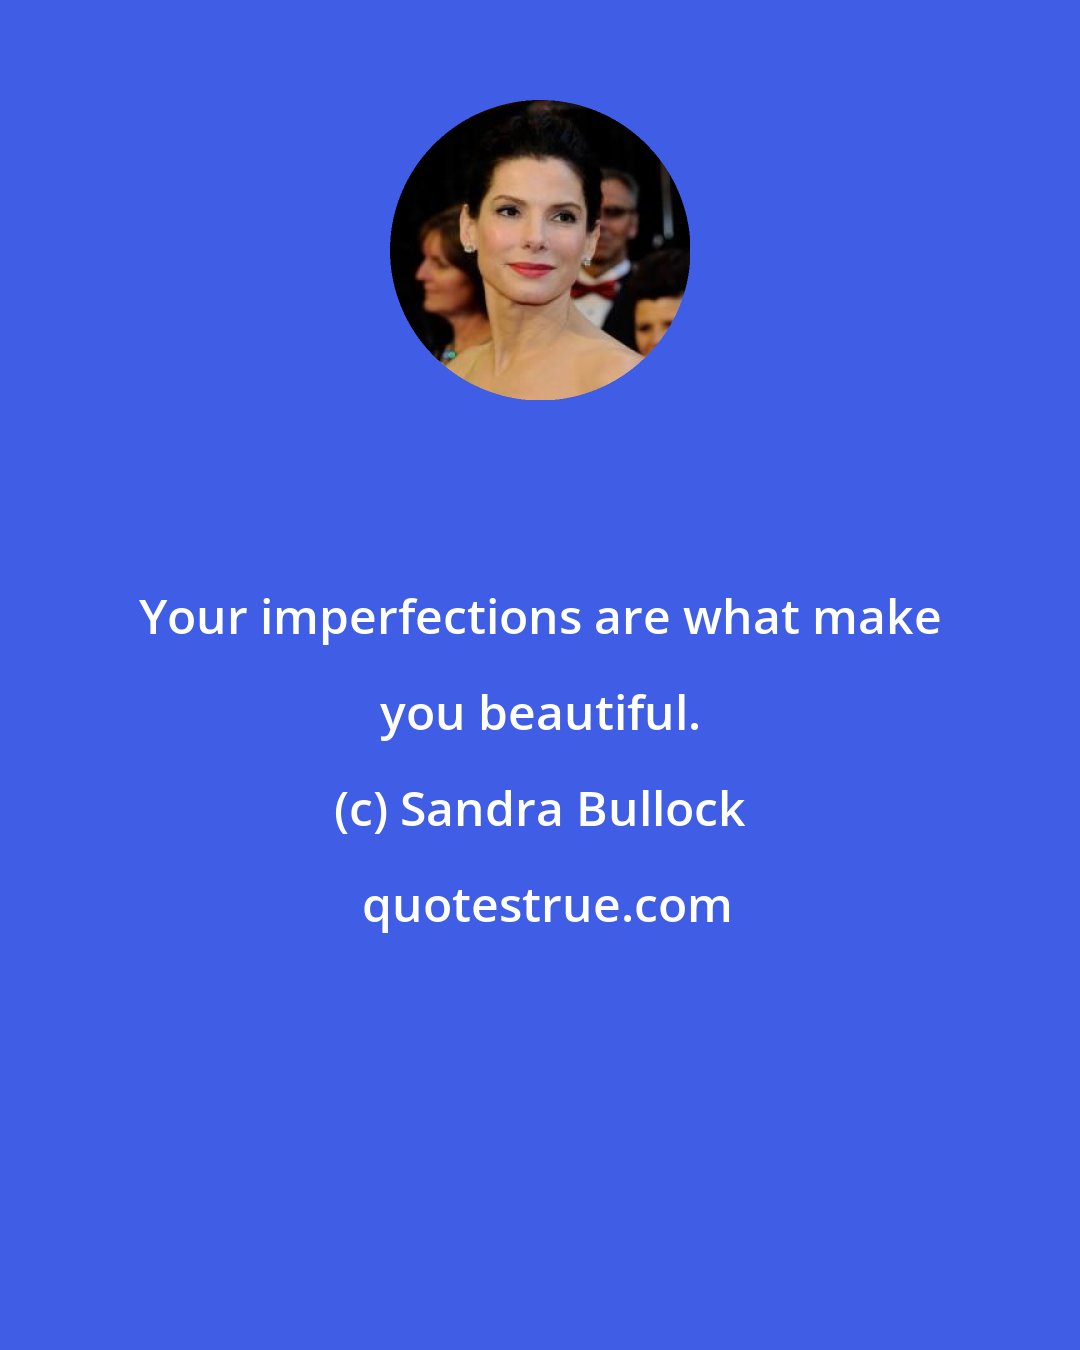 Sandra Bullock: Your imperfections are what make you beautiful.